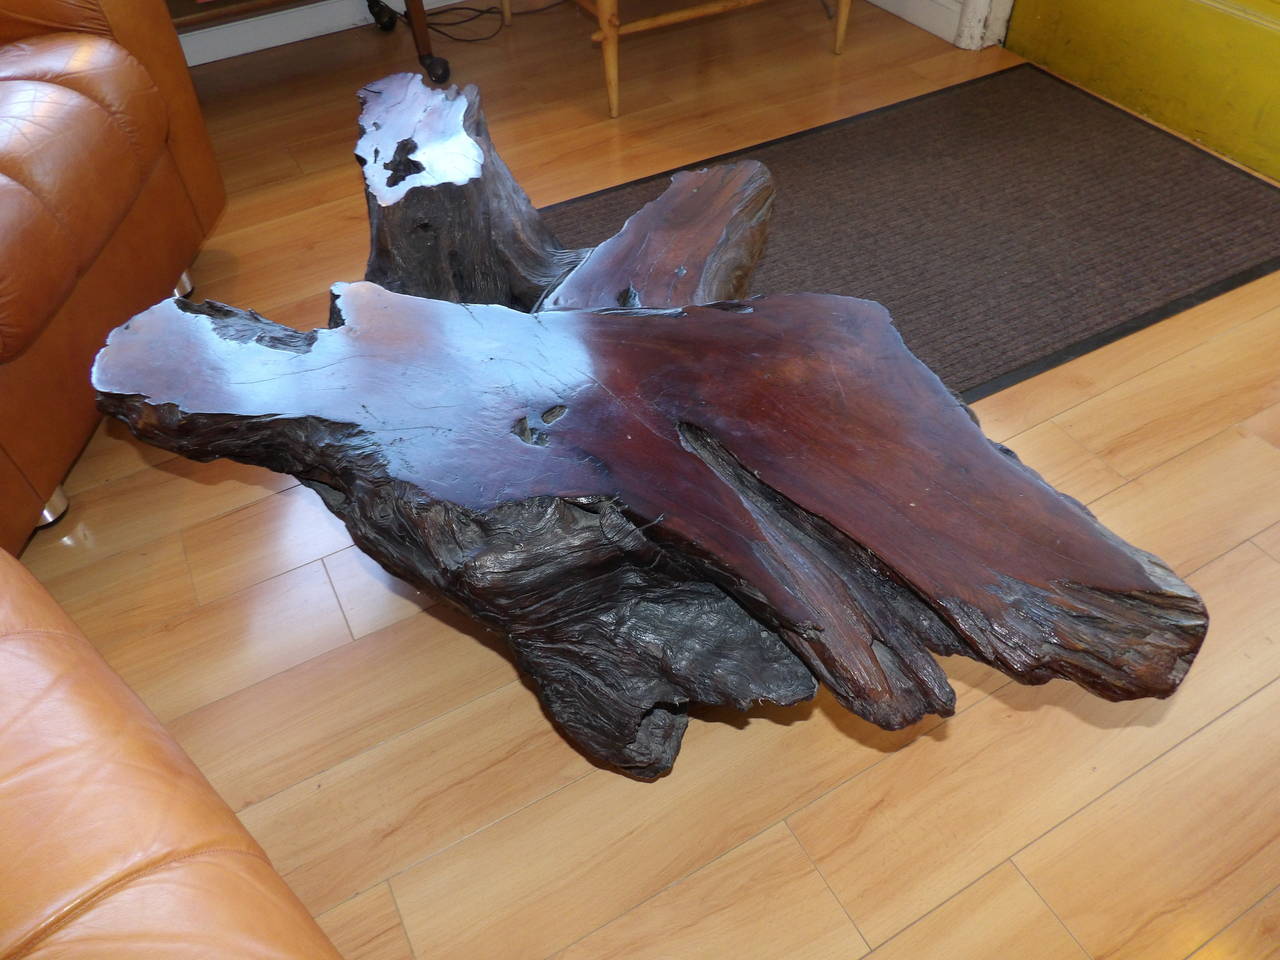 An organic California Redwood live edge driftwood coffee table. Notice multilevel design with beautiful burl-wood to flat surfaces. Rests on 3 castors for easy moving.